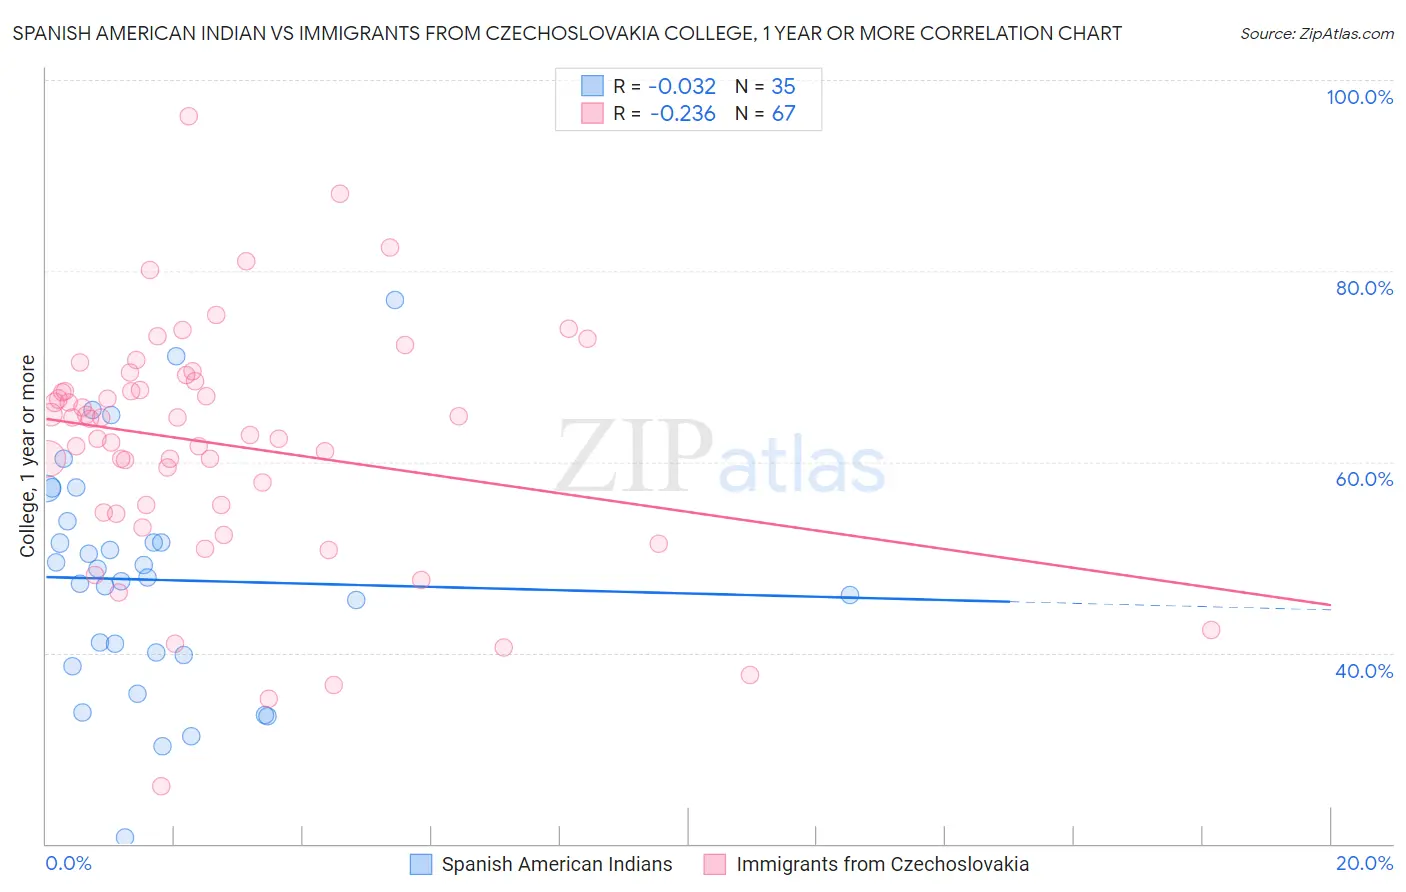 Spanish American Indian vs Immigrants from Czechoslovakia College, 1 year or more